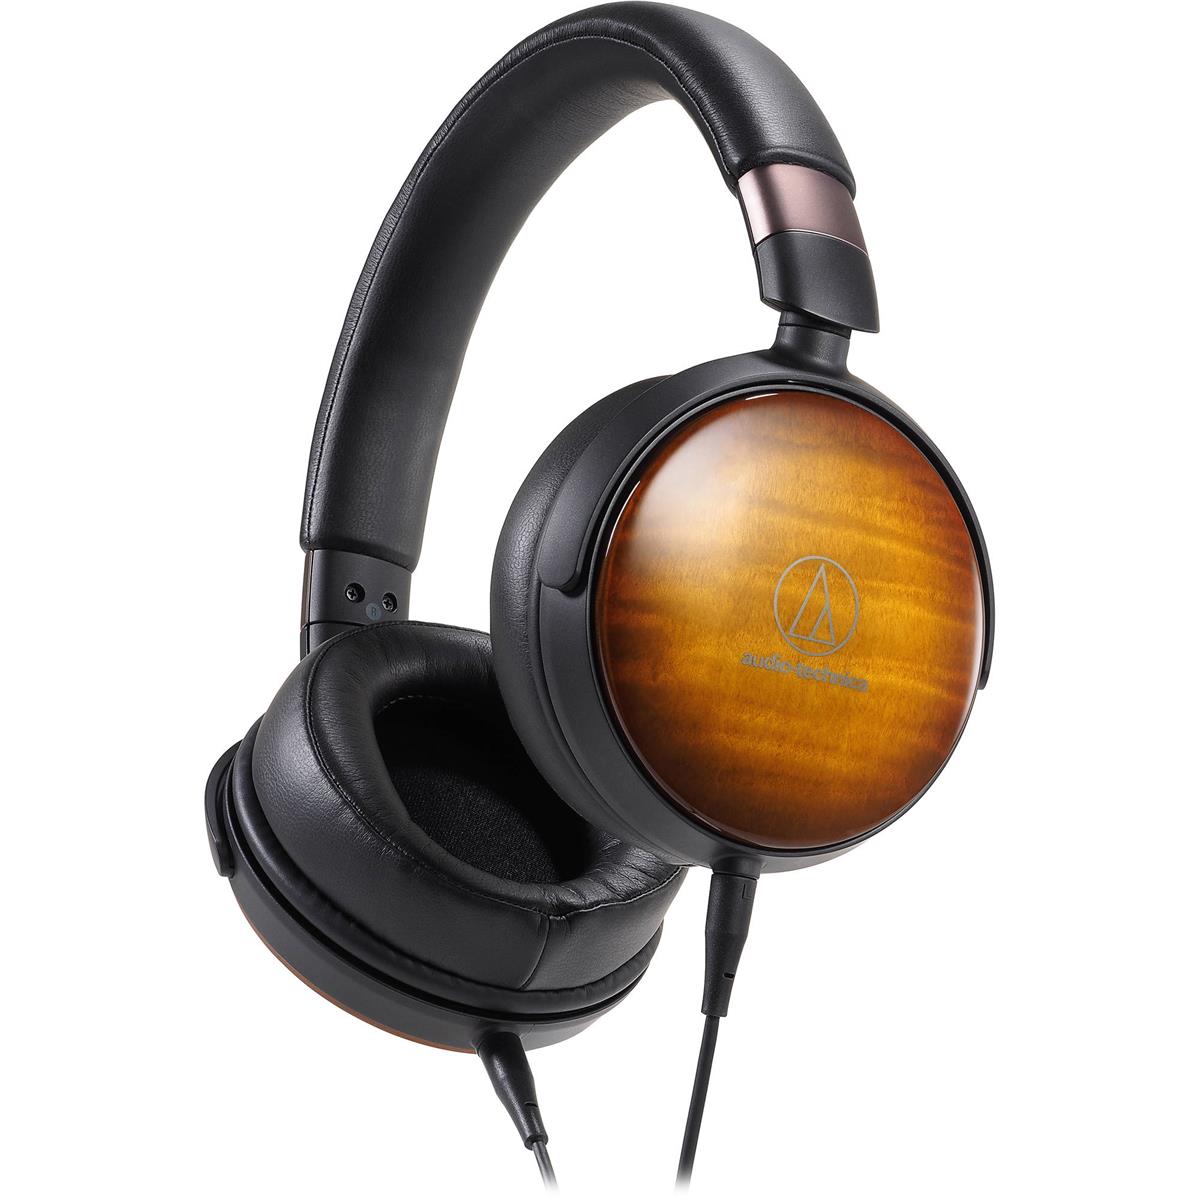 Image of Audio-Technica ATH-WP900 Closed-Back On-Ear Wooden Headphones